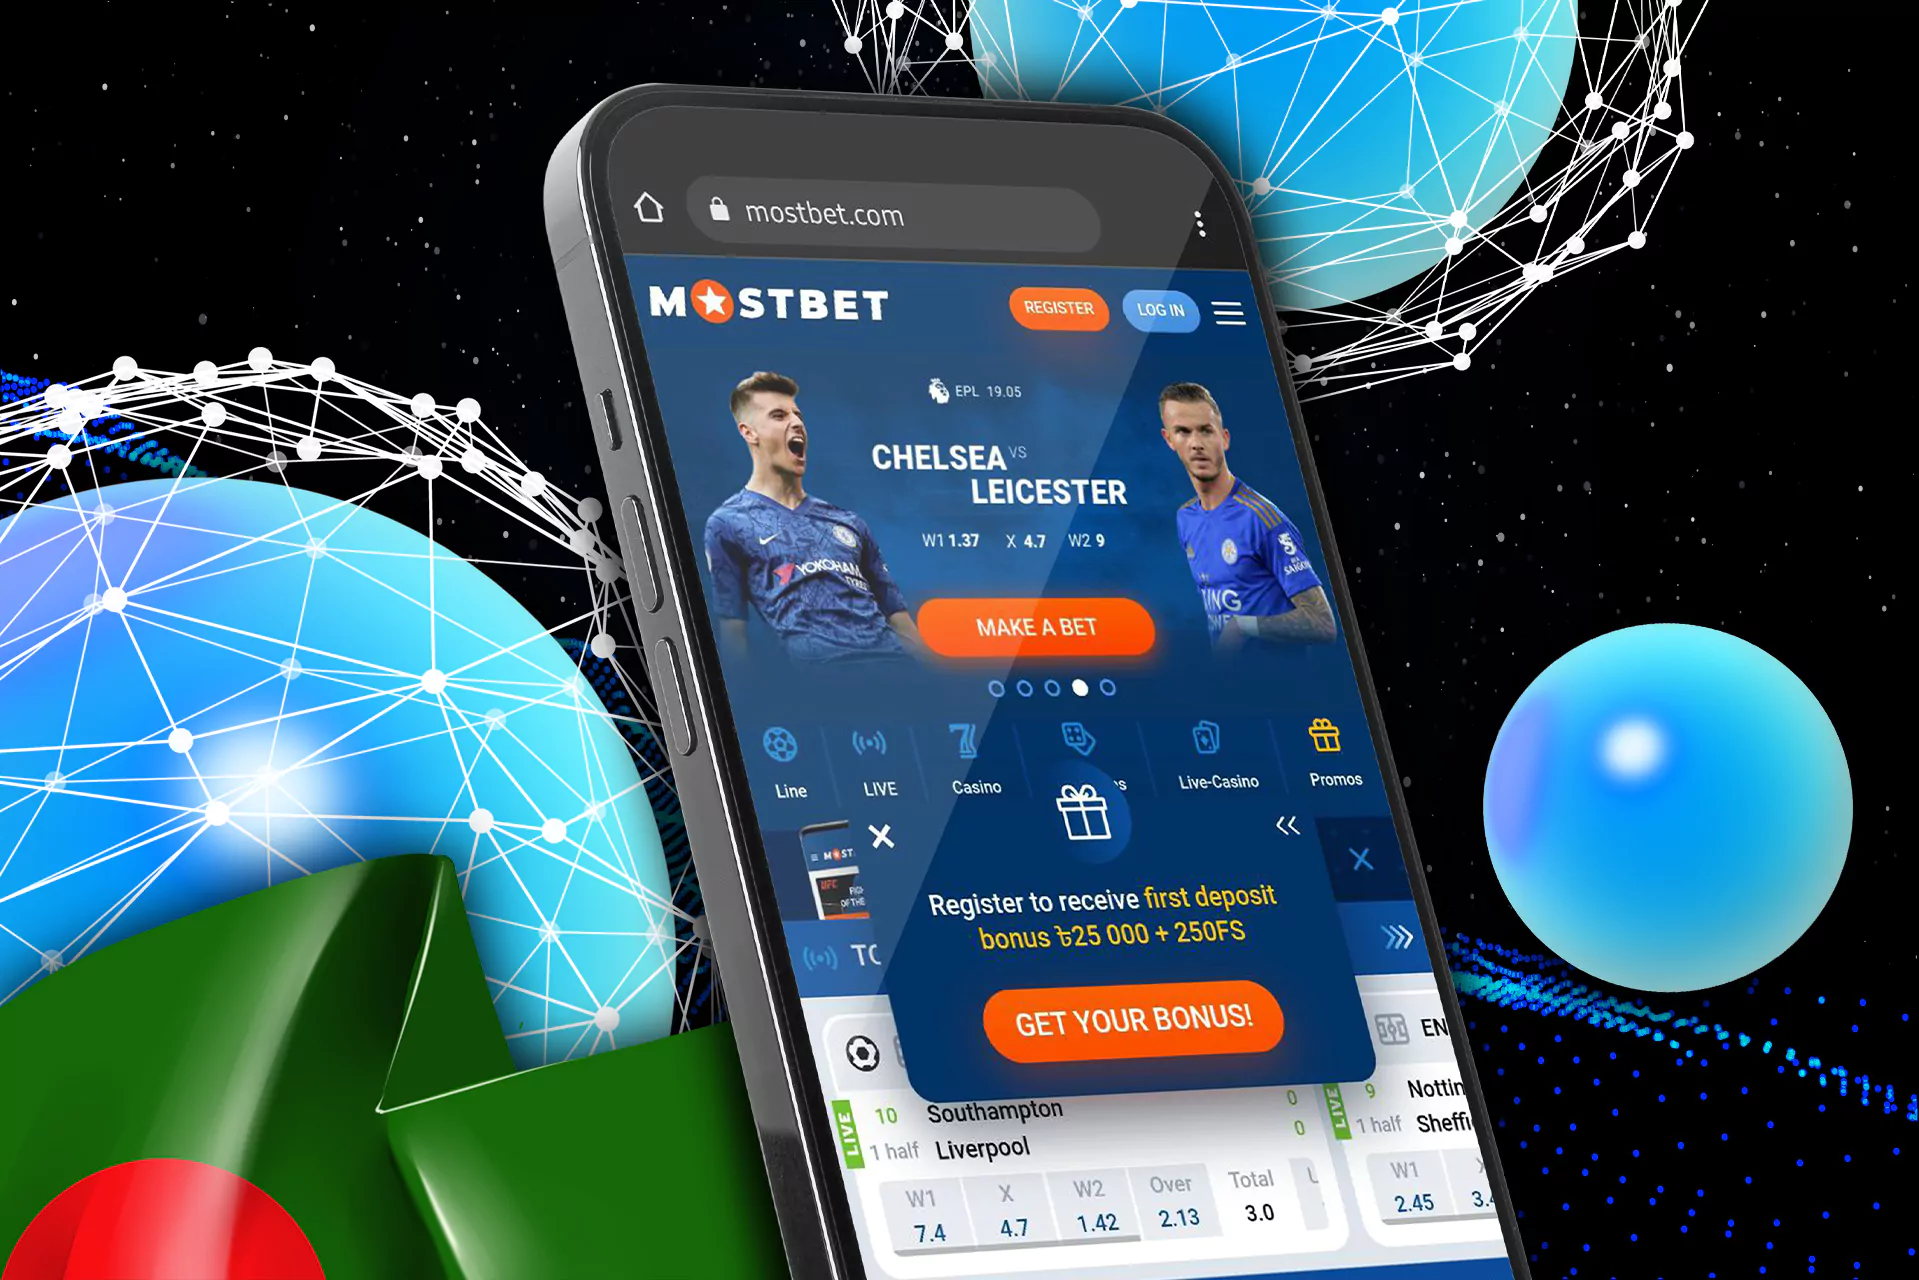 The interface of the mobile site Mostbet.